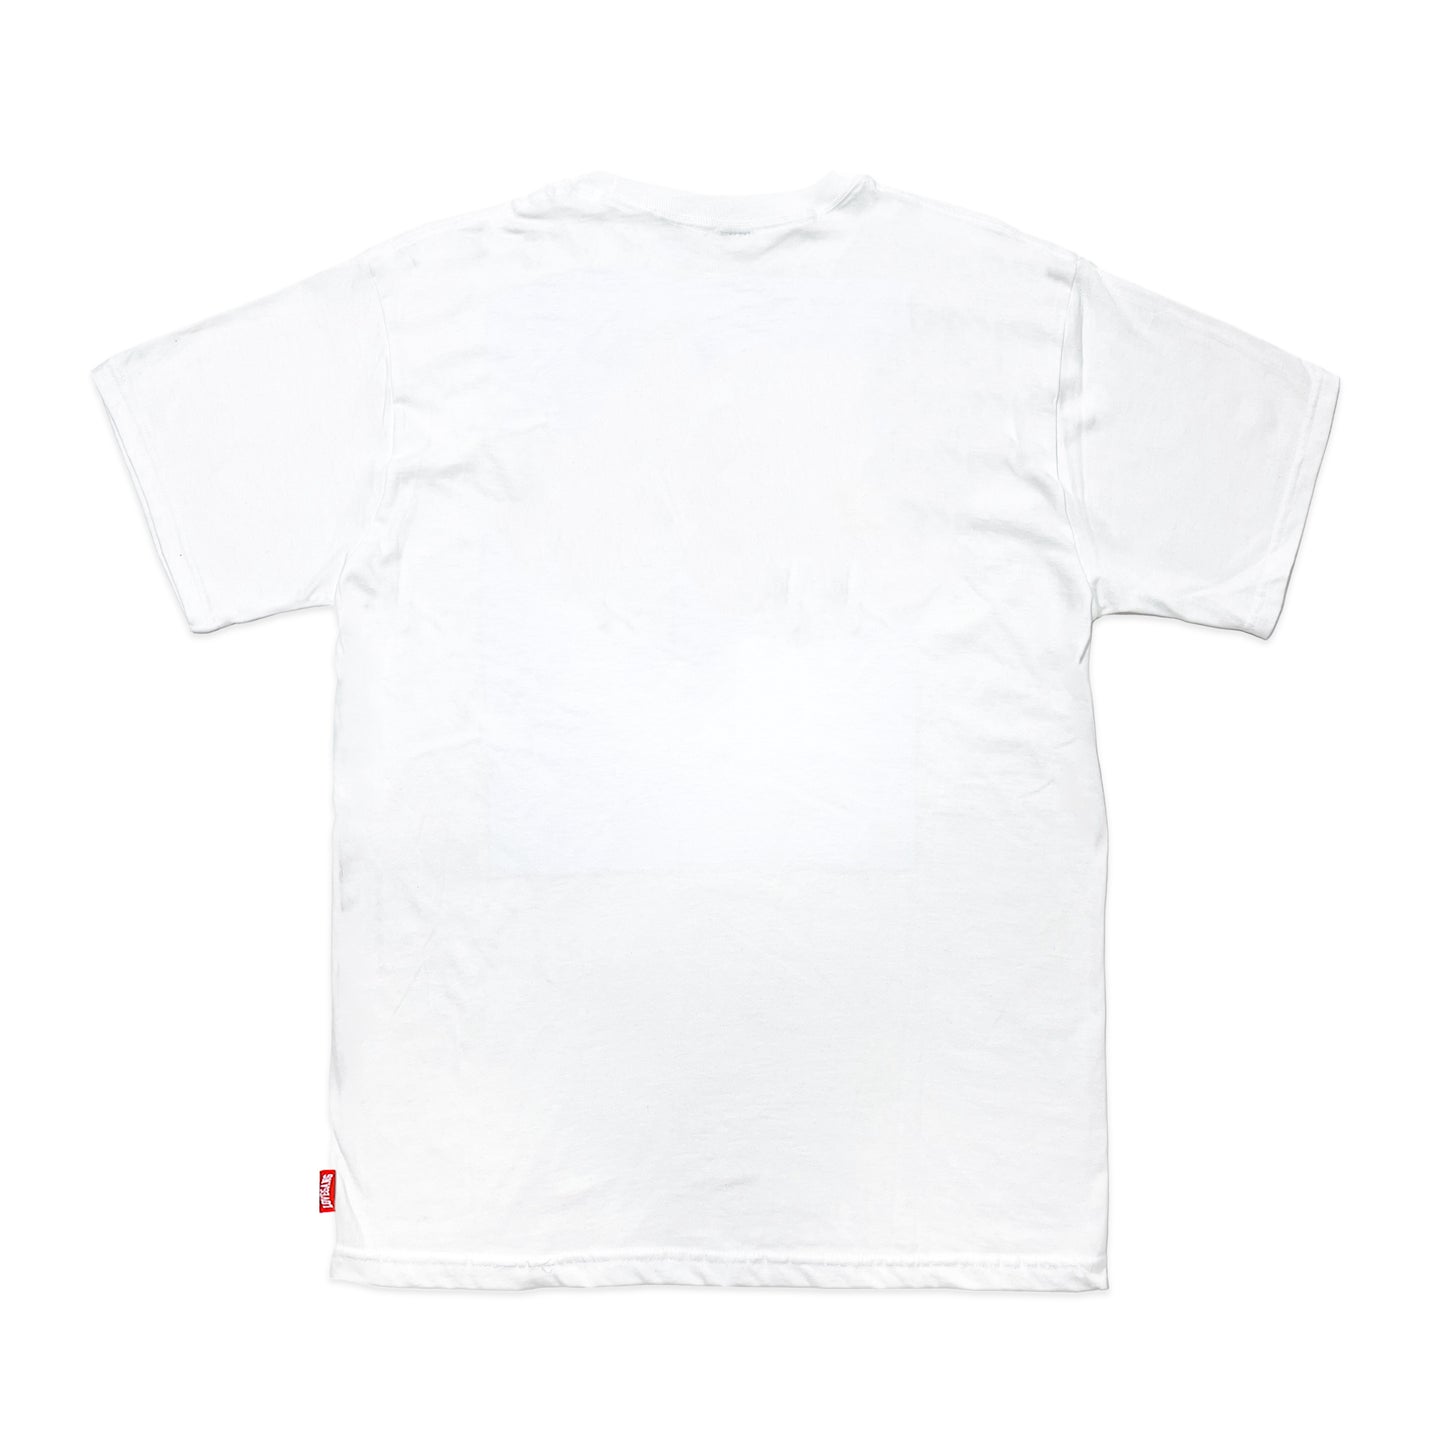 BLOOM '21 - T-SHIRT (WH)